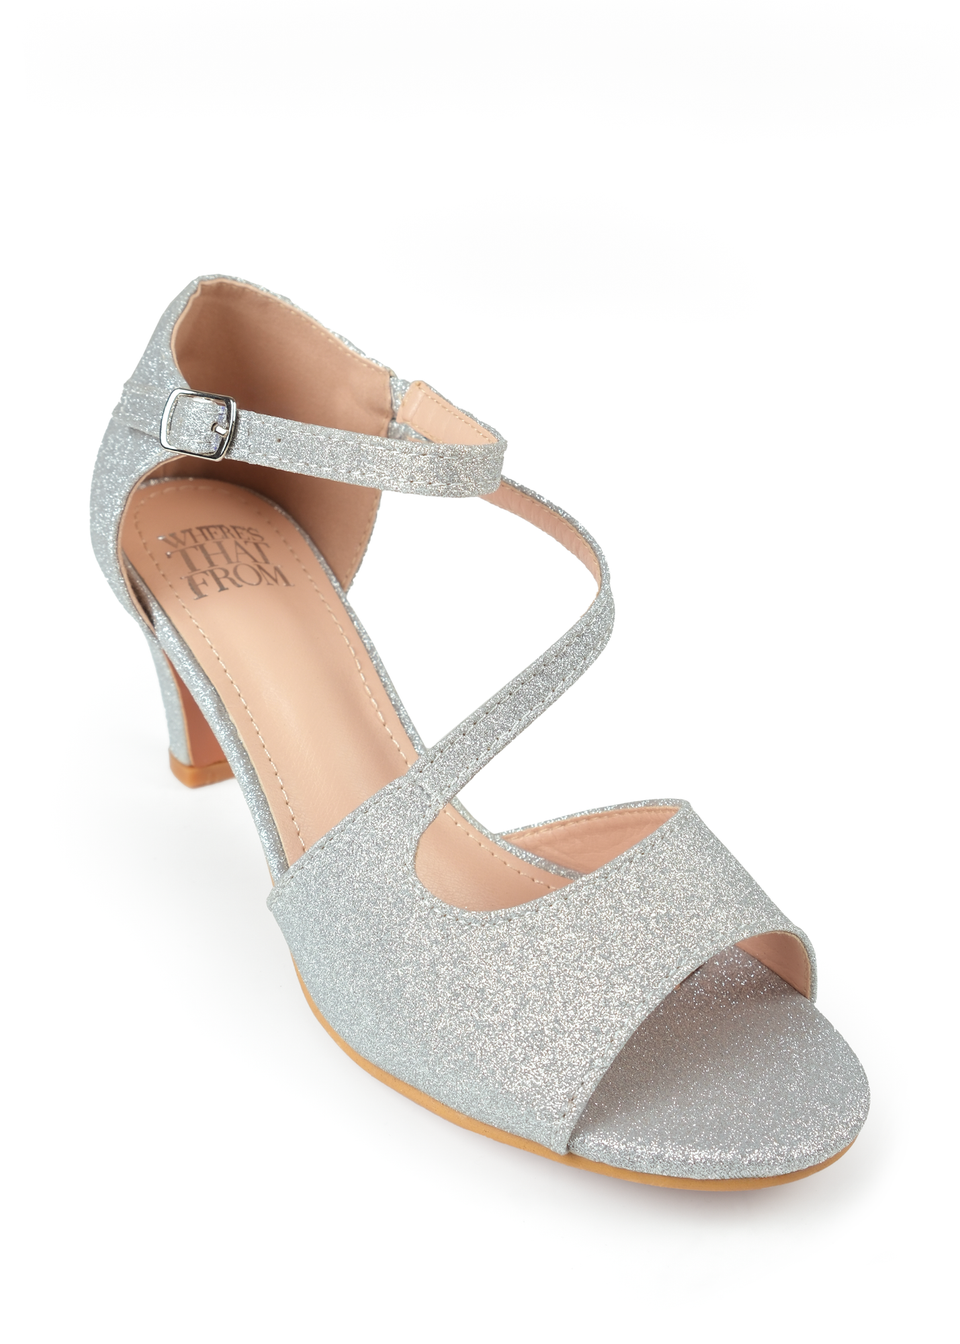 Where's That From Silver Glitter Beatrice Low Kitten Heels